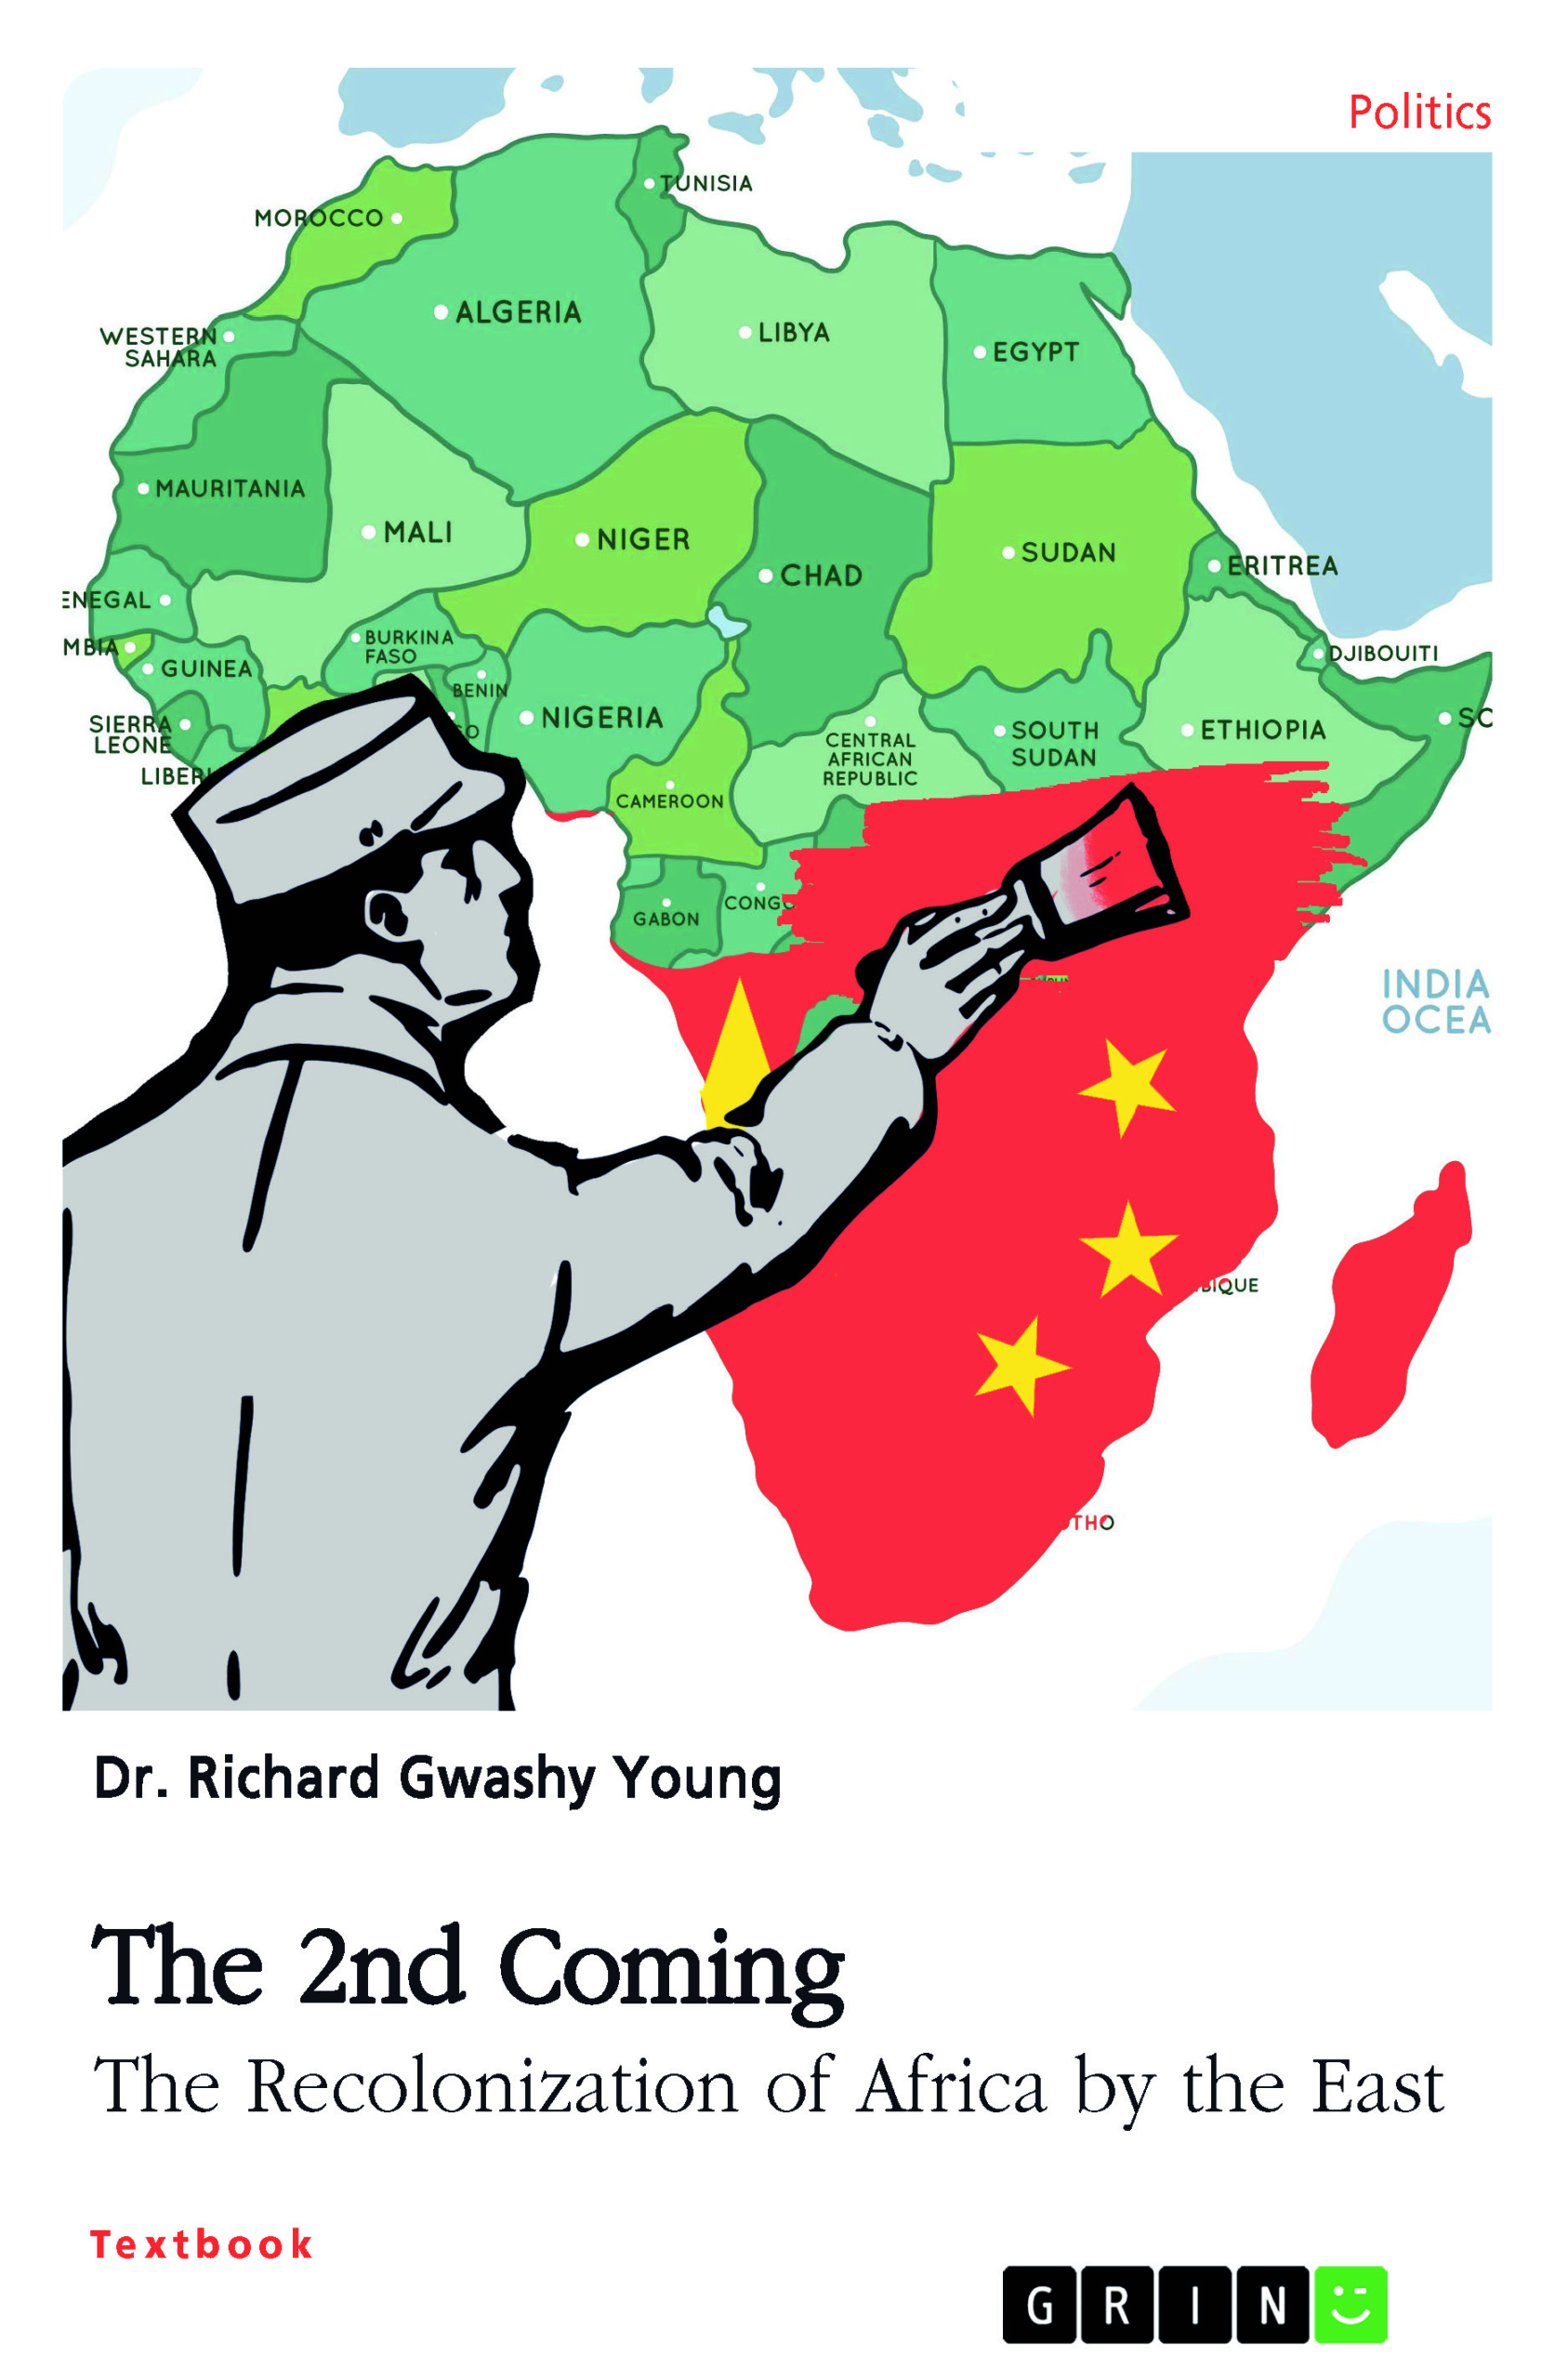 The neocolonial approach of China in Africa